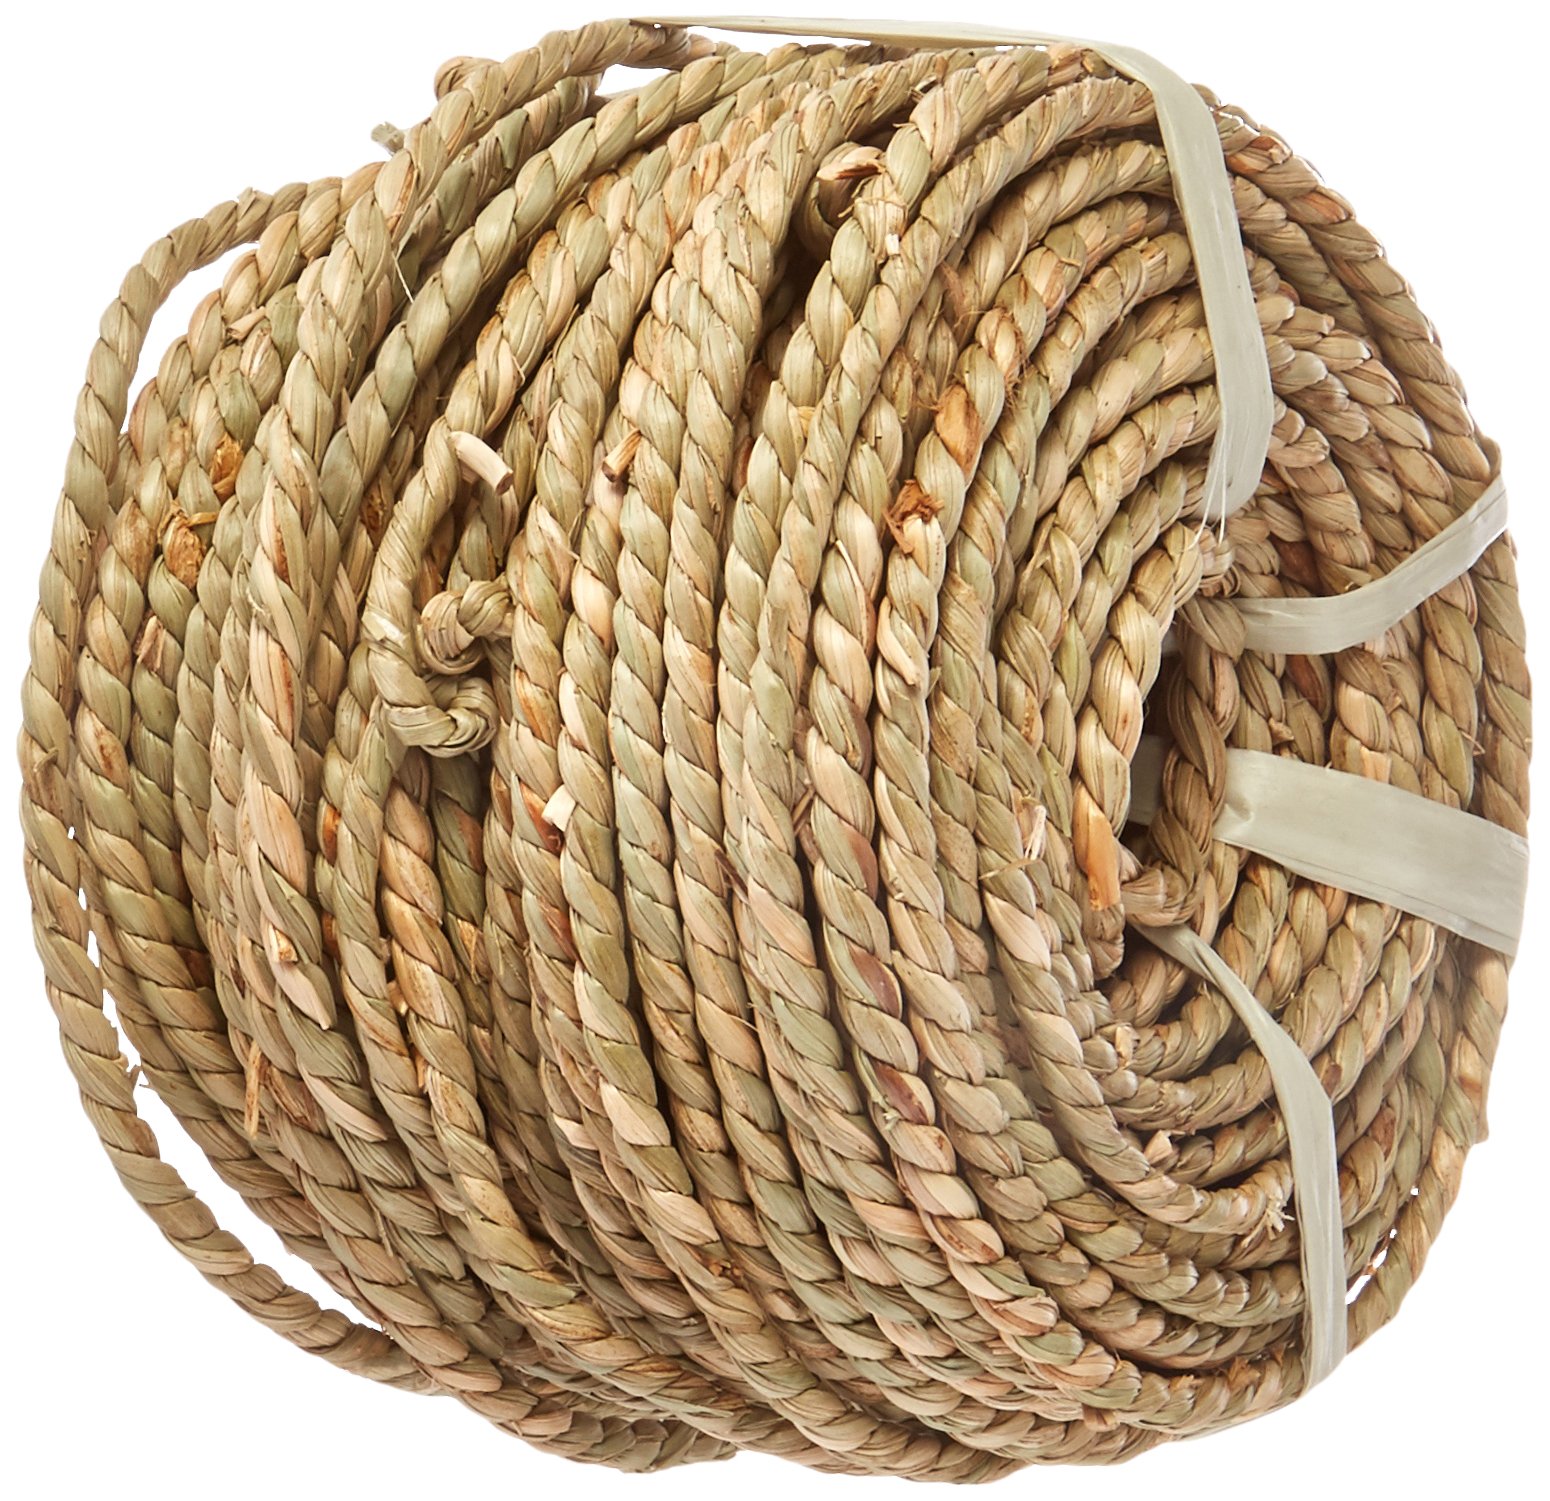 Commonwealth Basket Basketry Sea Grass #3 4-1/2Mmx5Mm 1-Pound Coil, Approximately 210-Feet